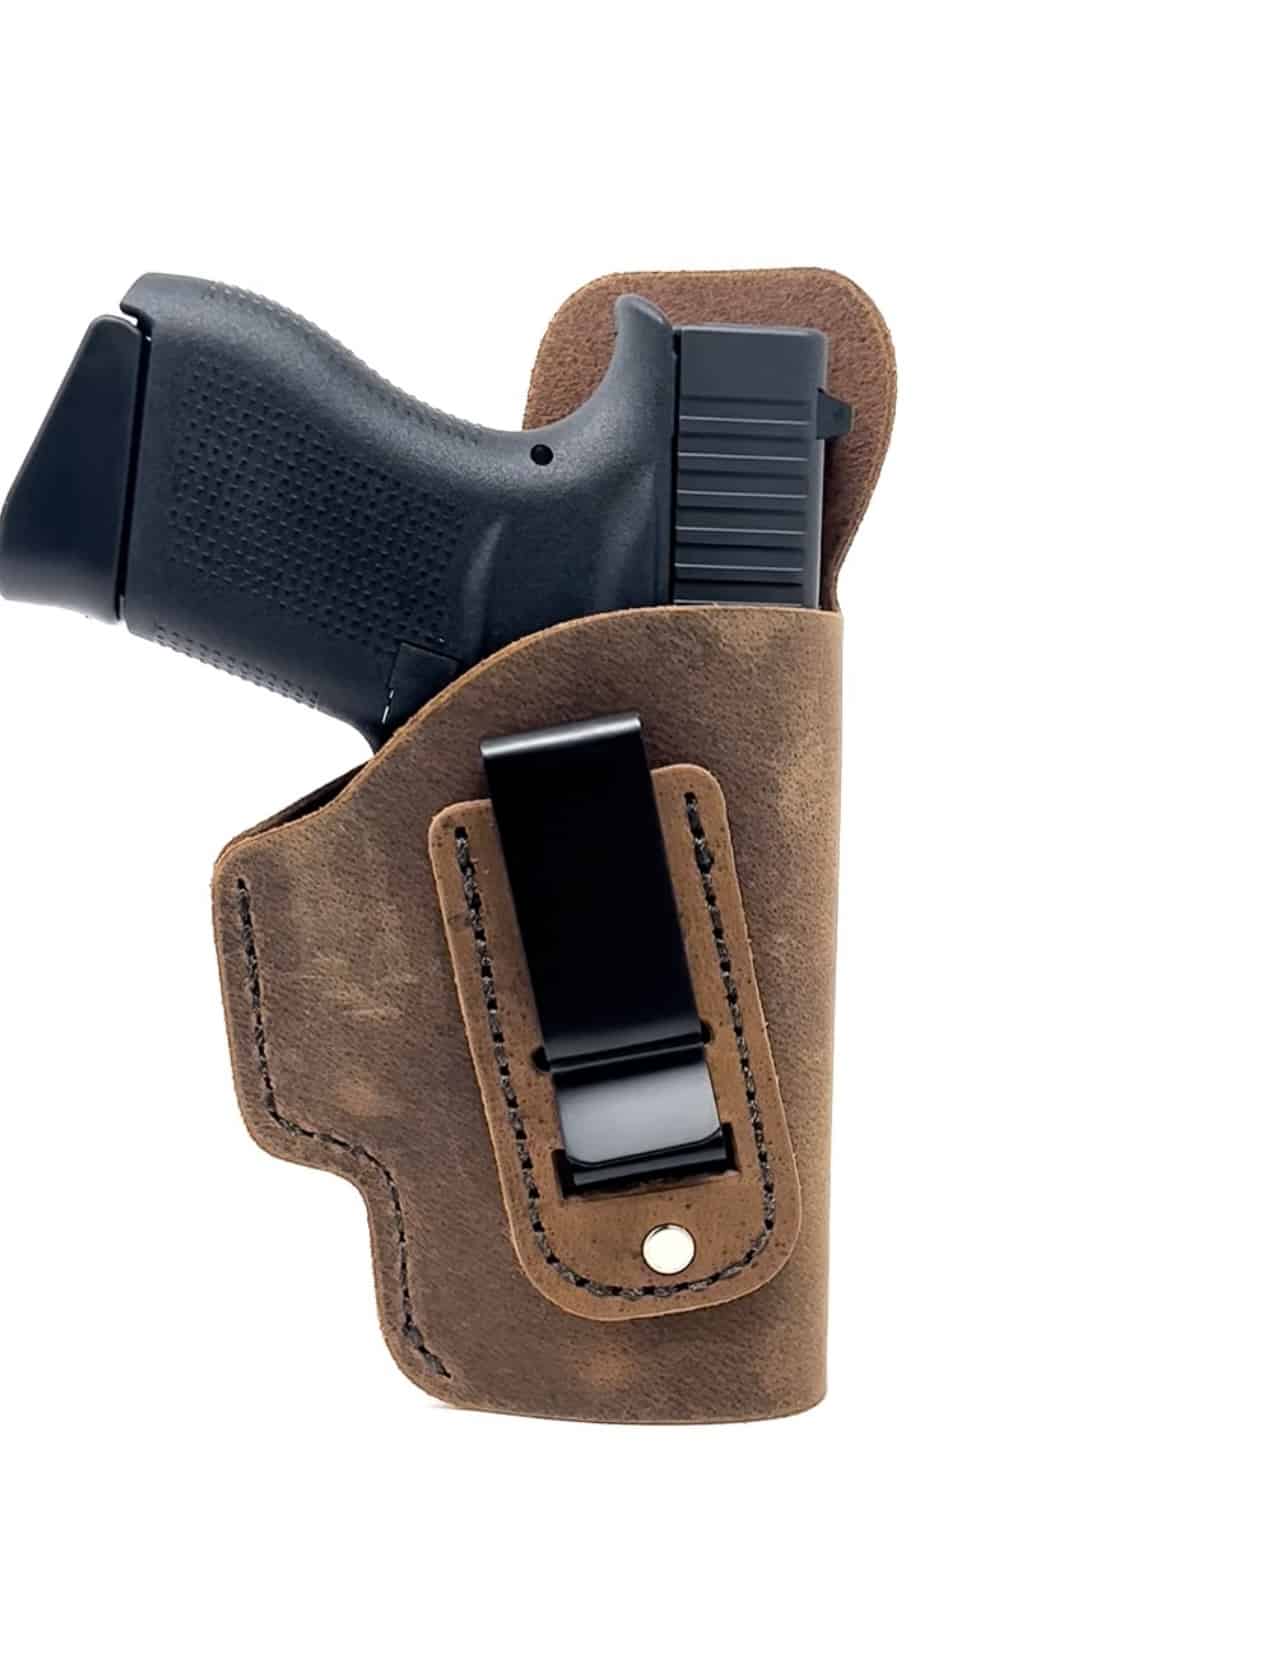 IWB LEATHER HOLSTER CONCEAL CARRY. GUN HOLSTER FOR WALTHER PPS M2 